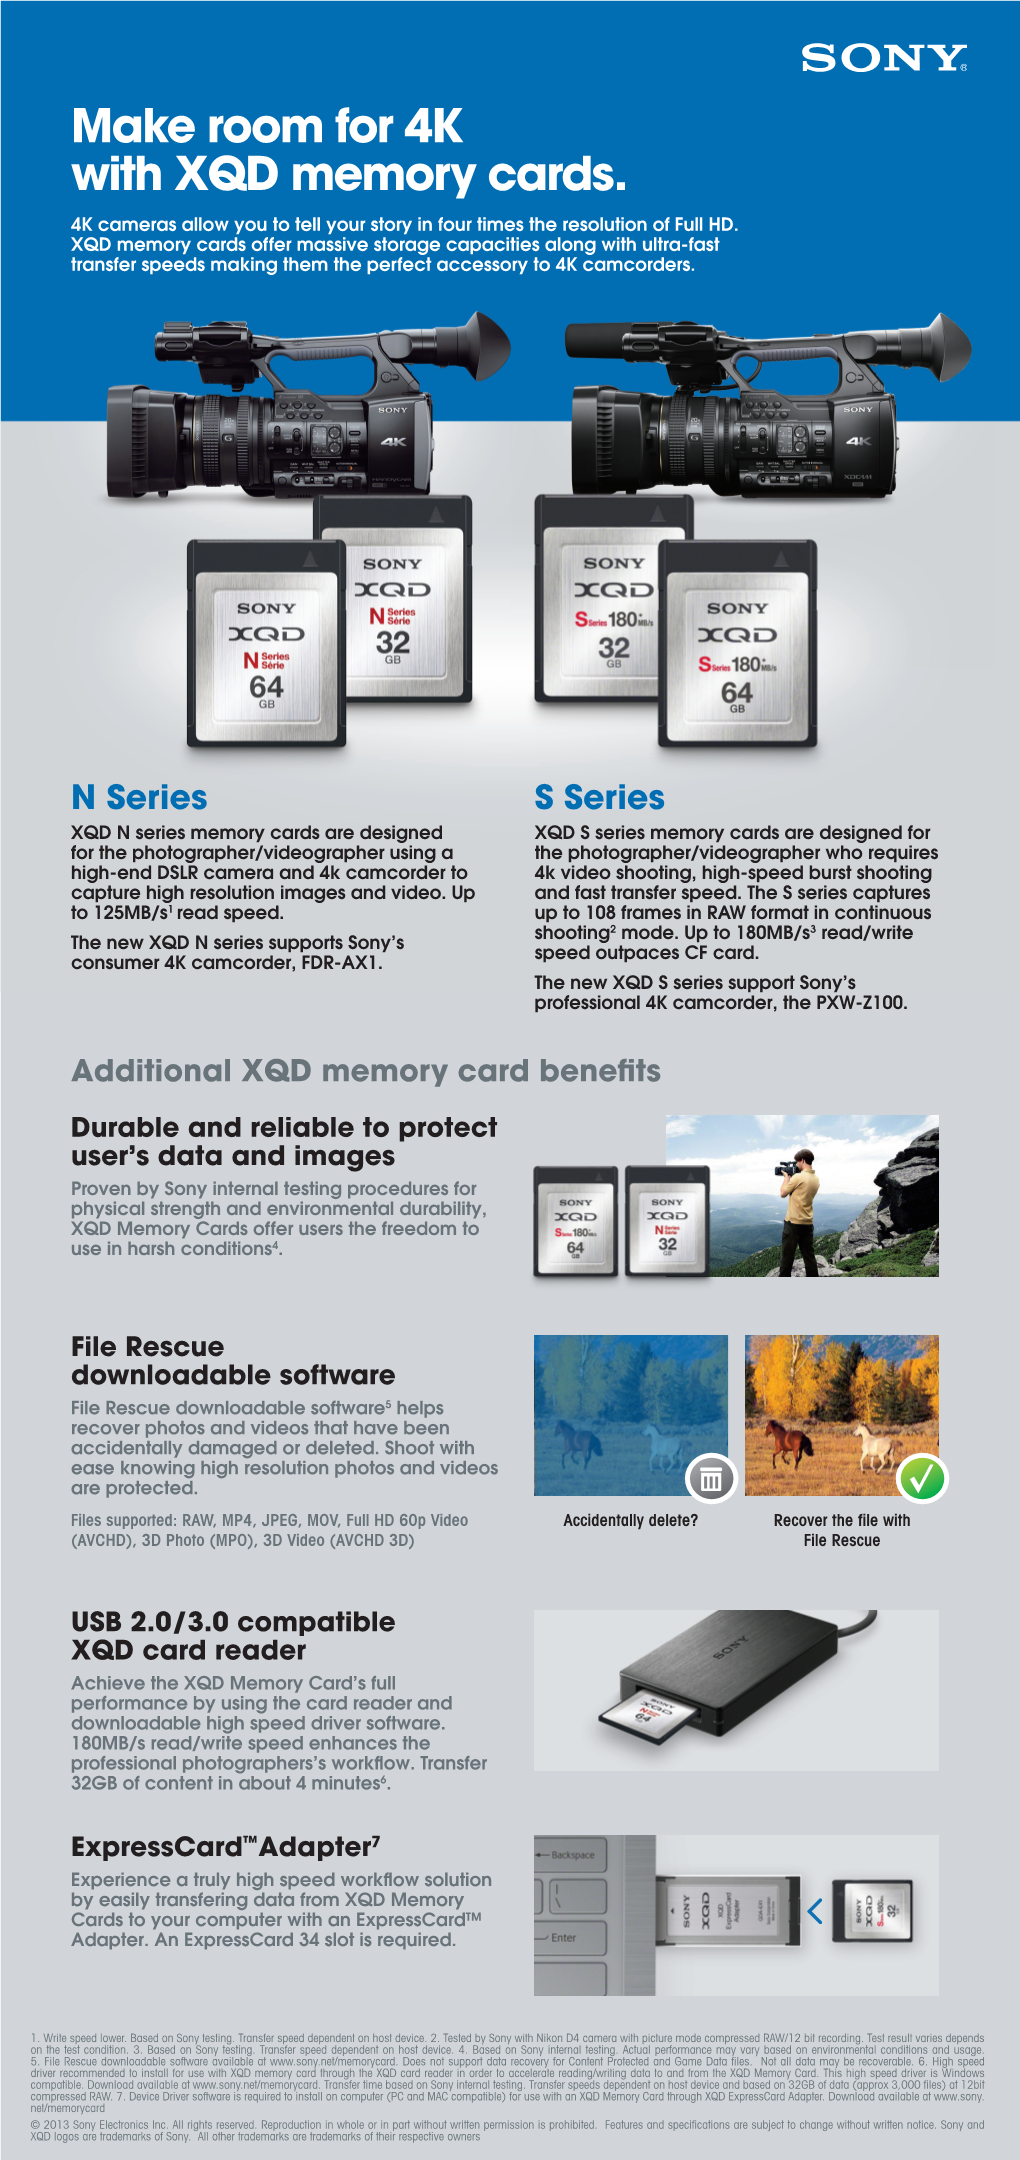 Make Room for 4K with XQD Memory Cards. 4K Cameras Allow You to Tell Your Story in Four Times the Resolution of Full HD